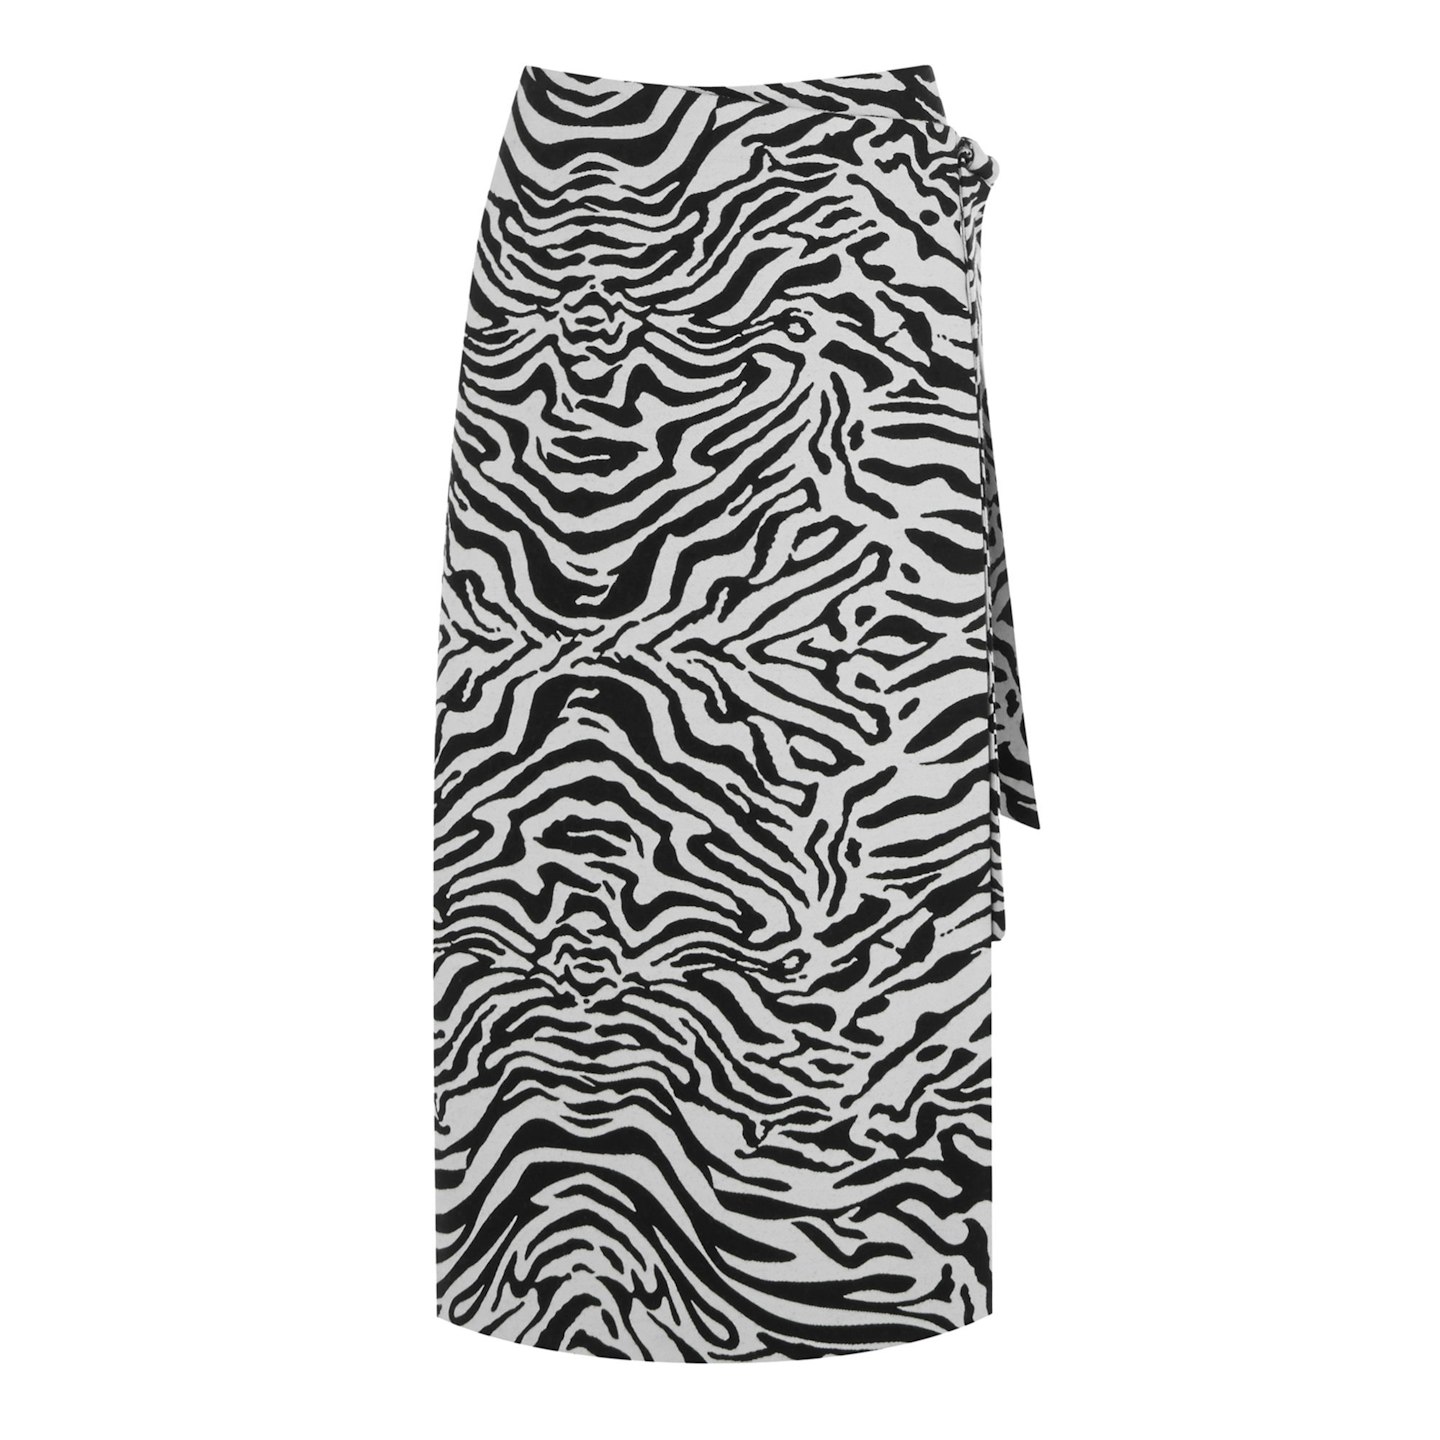 Meet Our New Midi Skirt Obsession | %%channel_name%%